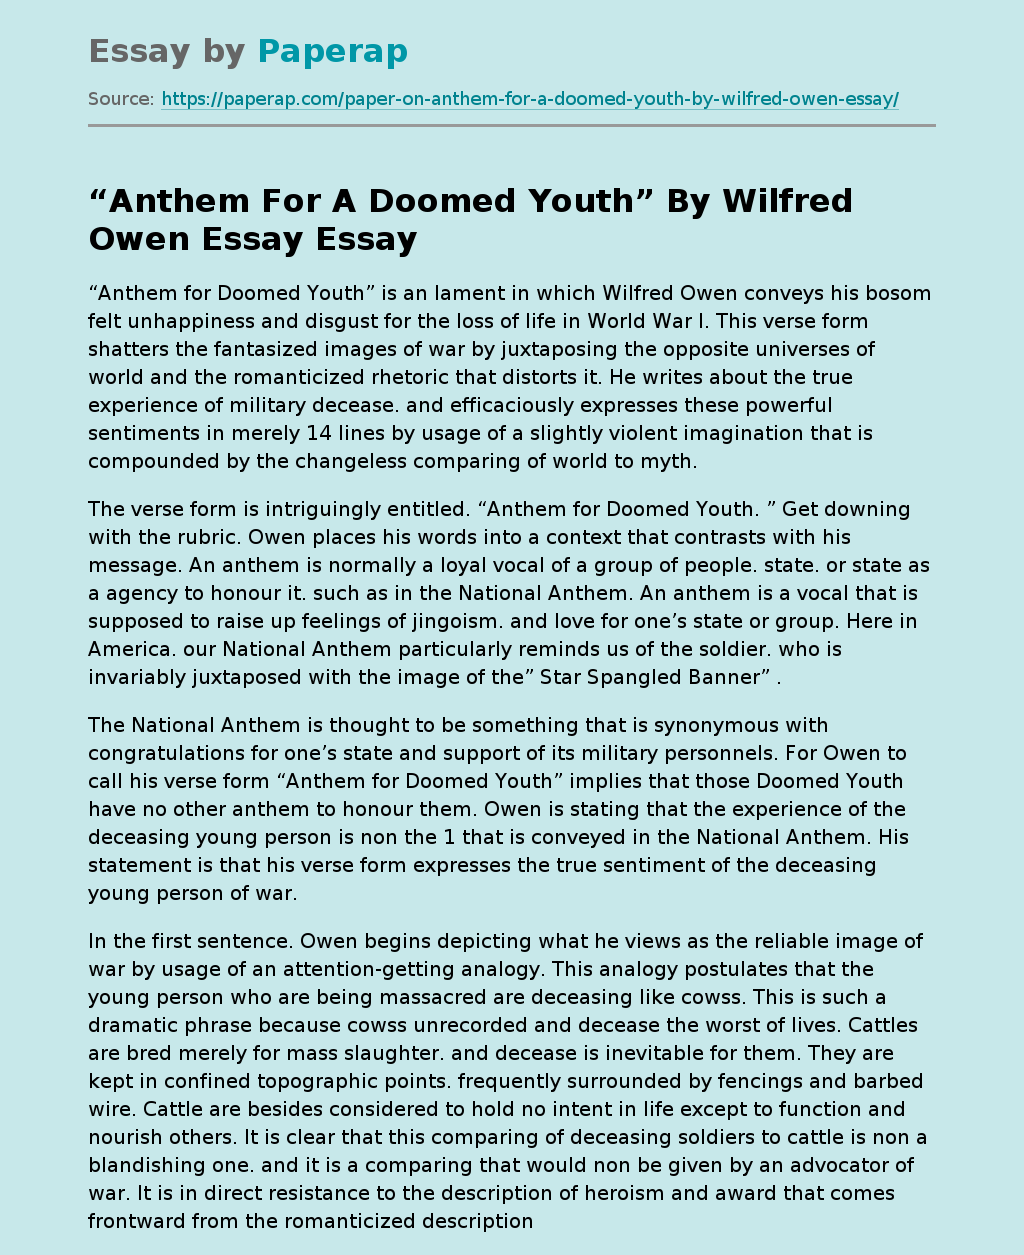 anthem for doomed youth essay 200 words